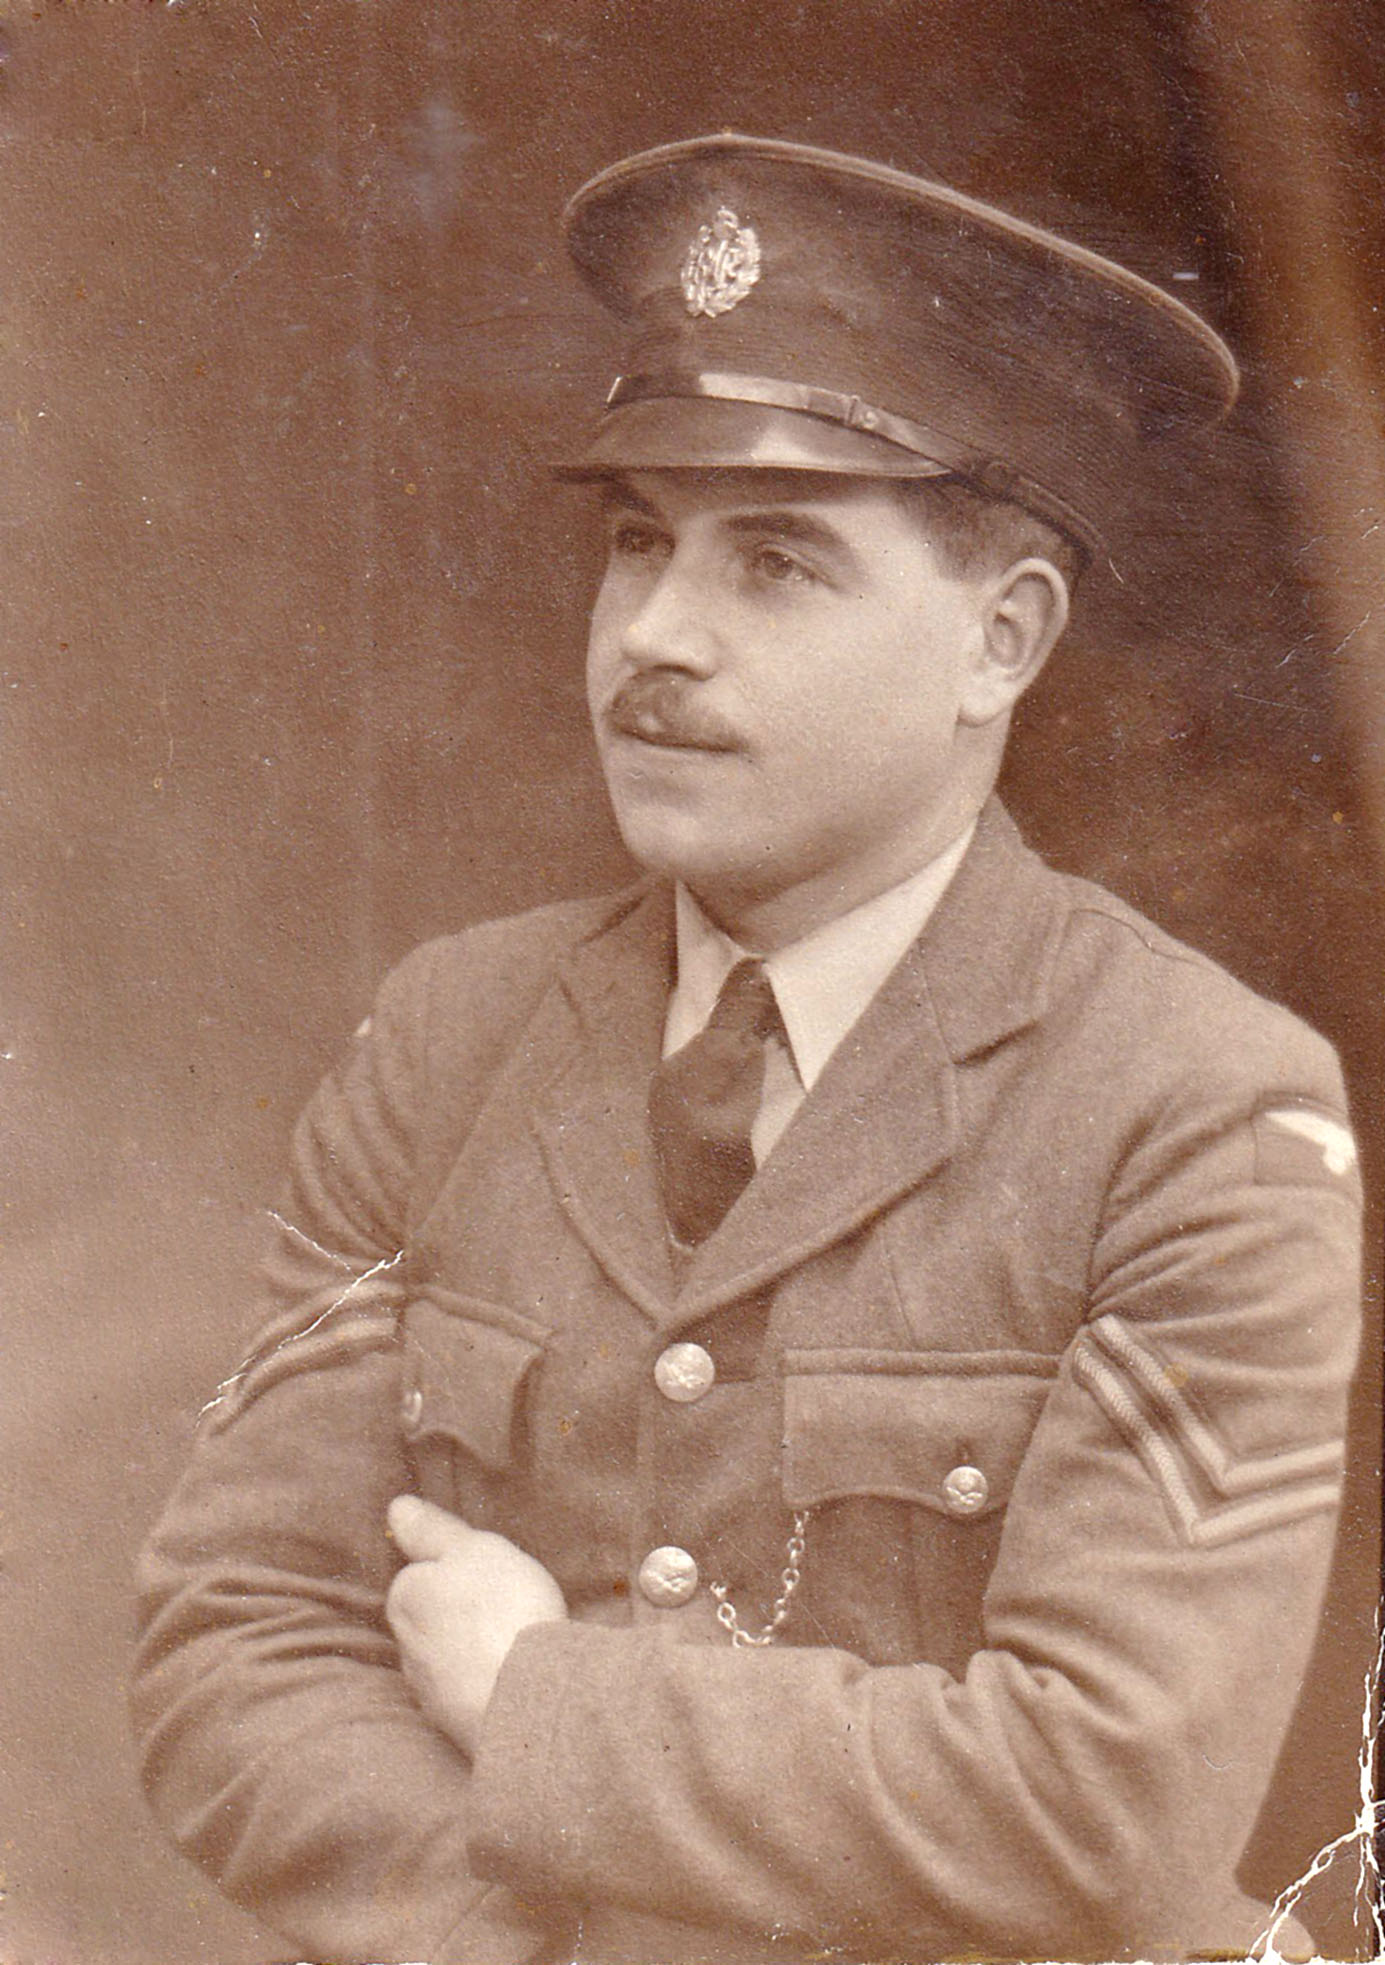 RAF Corporal Harry King RAF Military Police was stationed at Worth Matravers Sept 1940 01